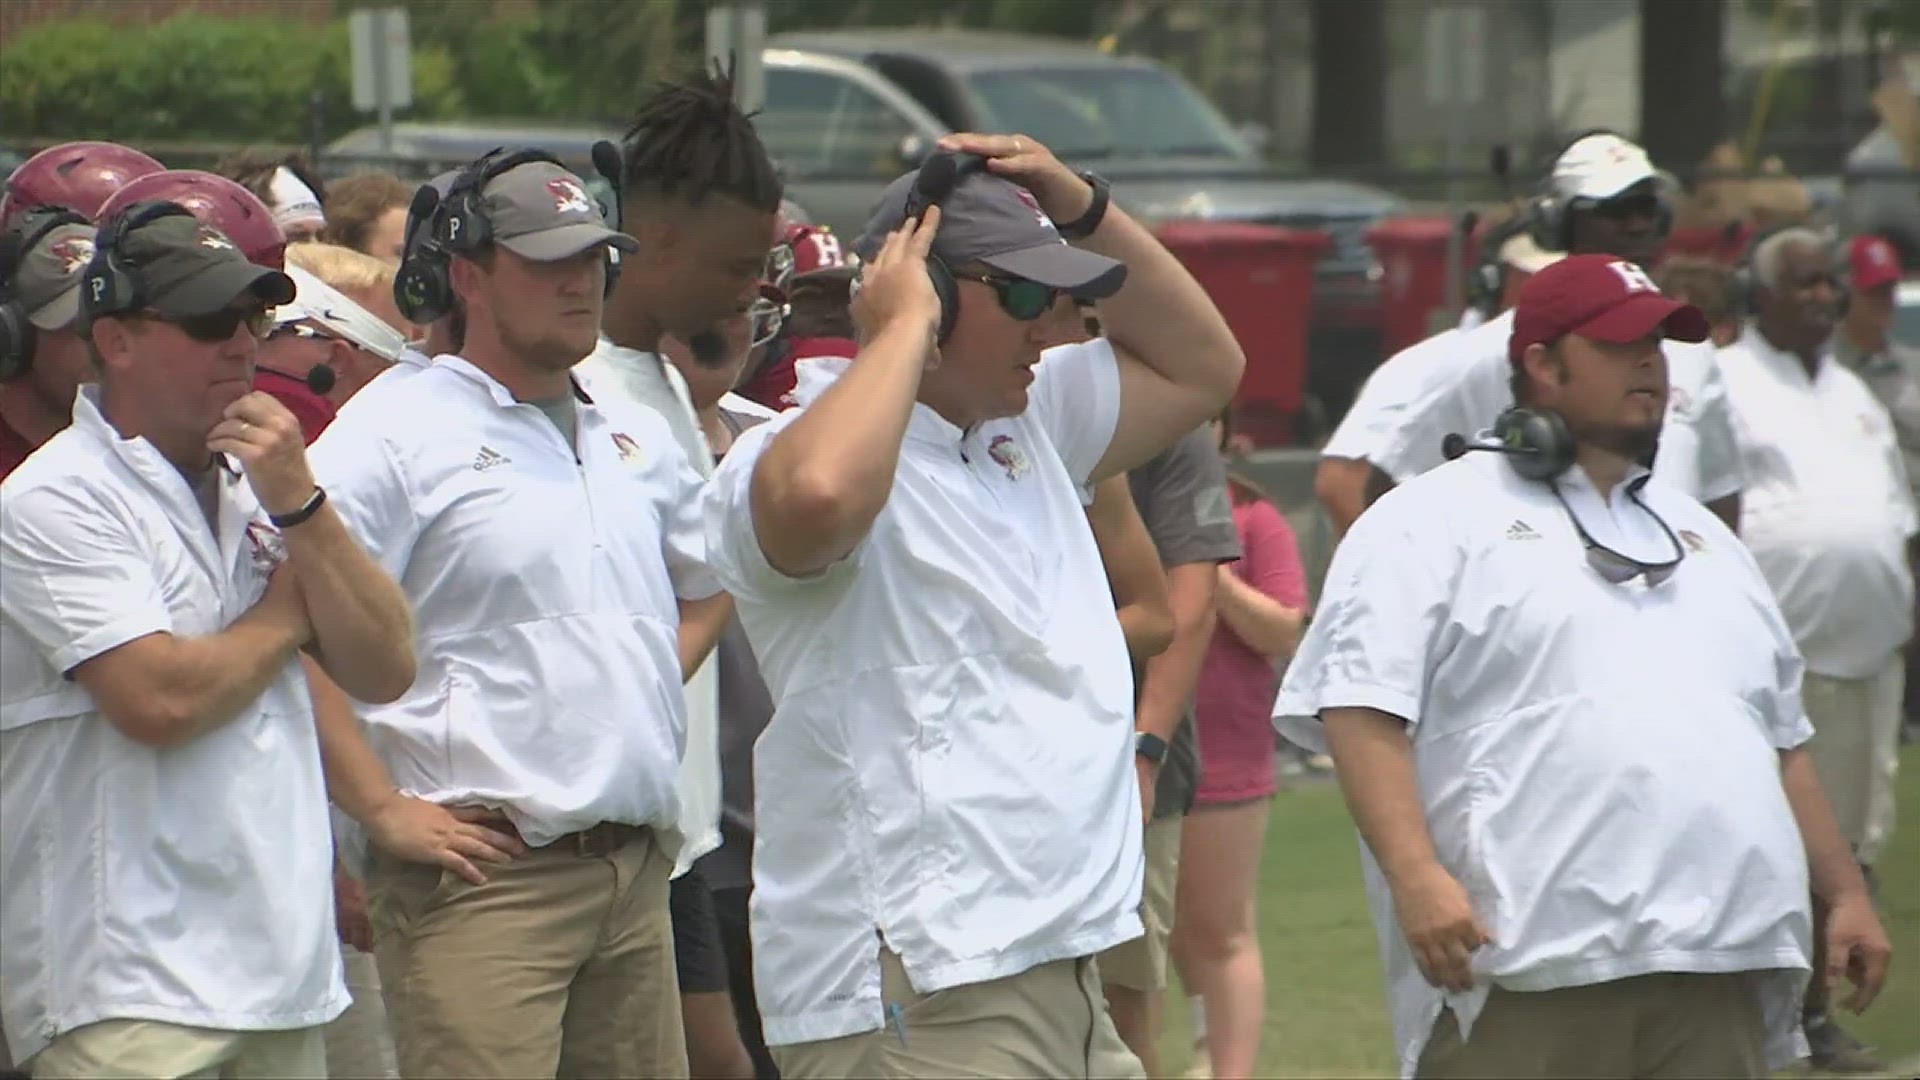 Hartselle is searching for a new football coach. On Tuesday, Opelika hired Bryan Moore to be their new head coach.